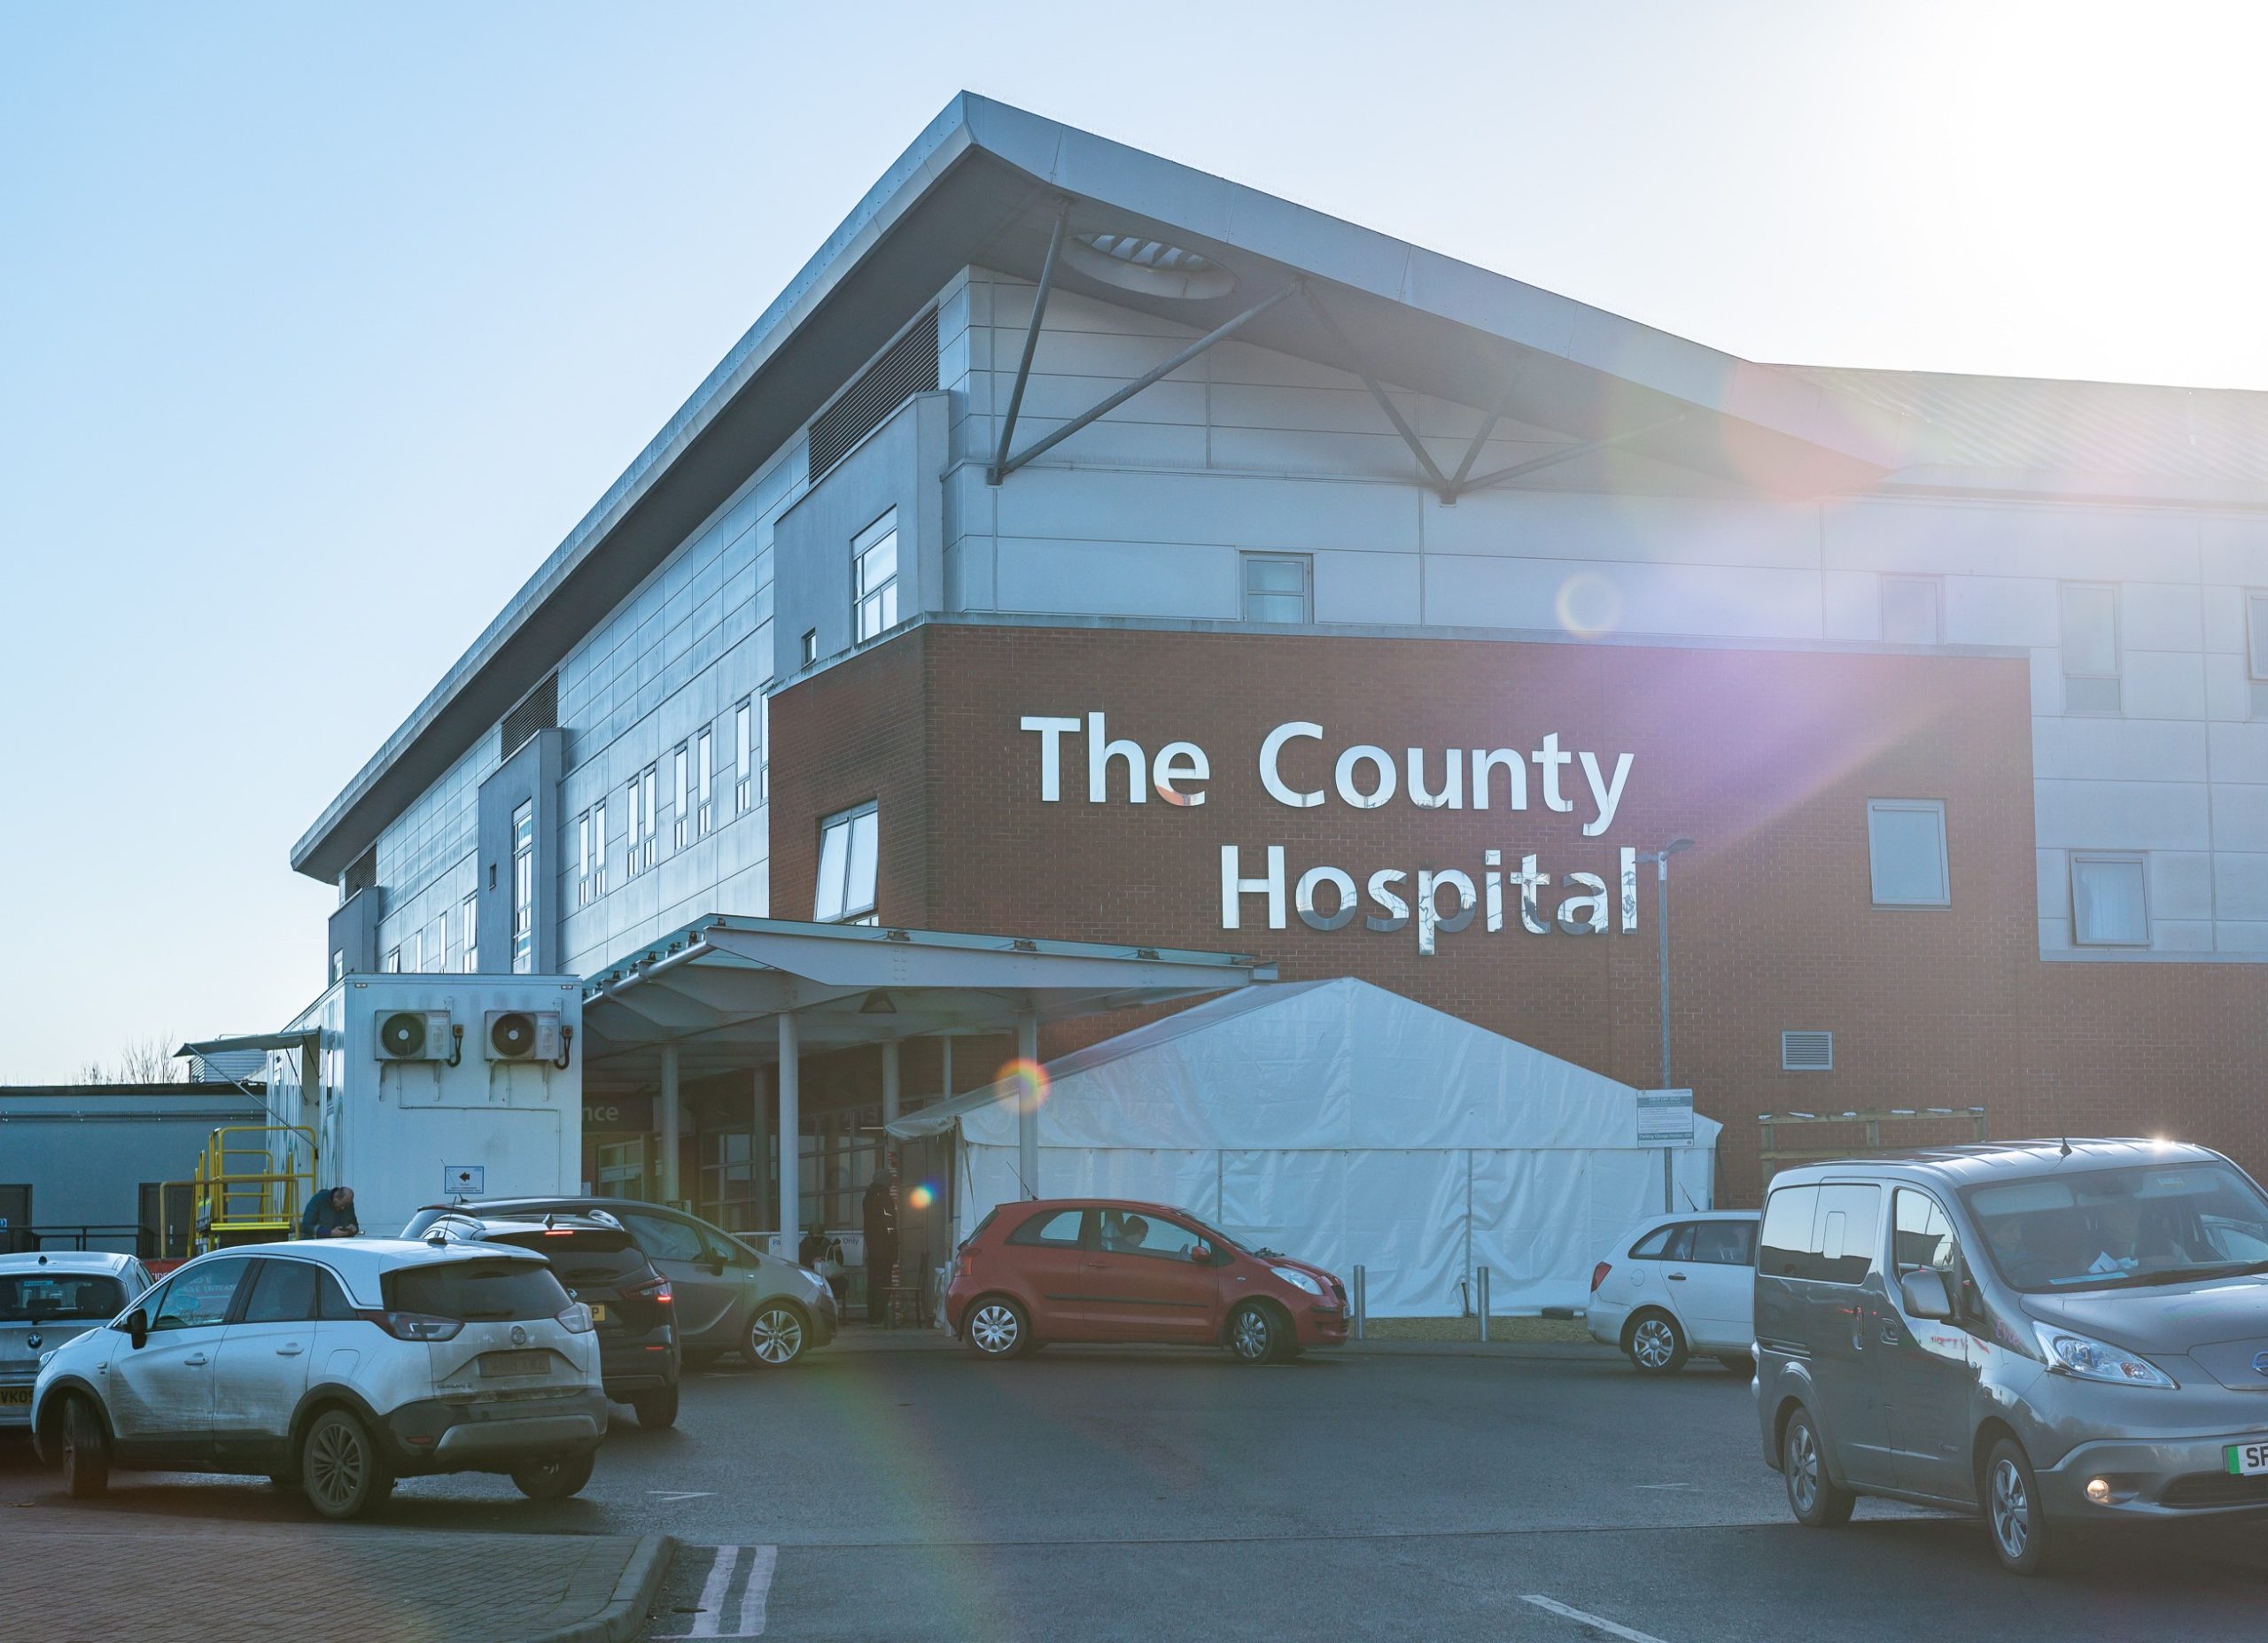 NEWS | Herefordshire’s COVID-19 infection rate is FALLING but the NHS remains under pressure